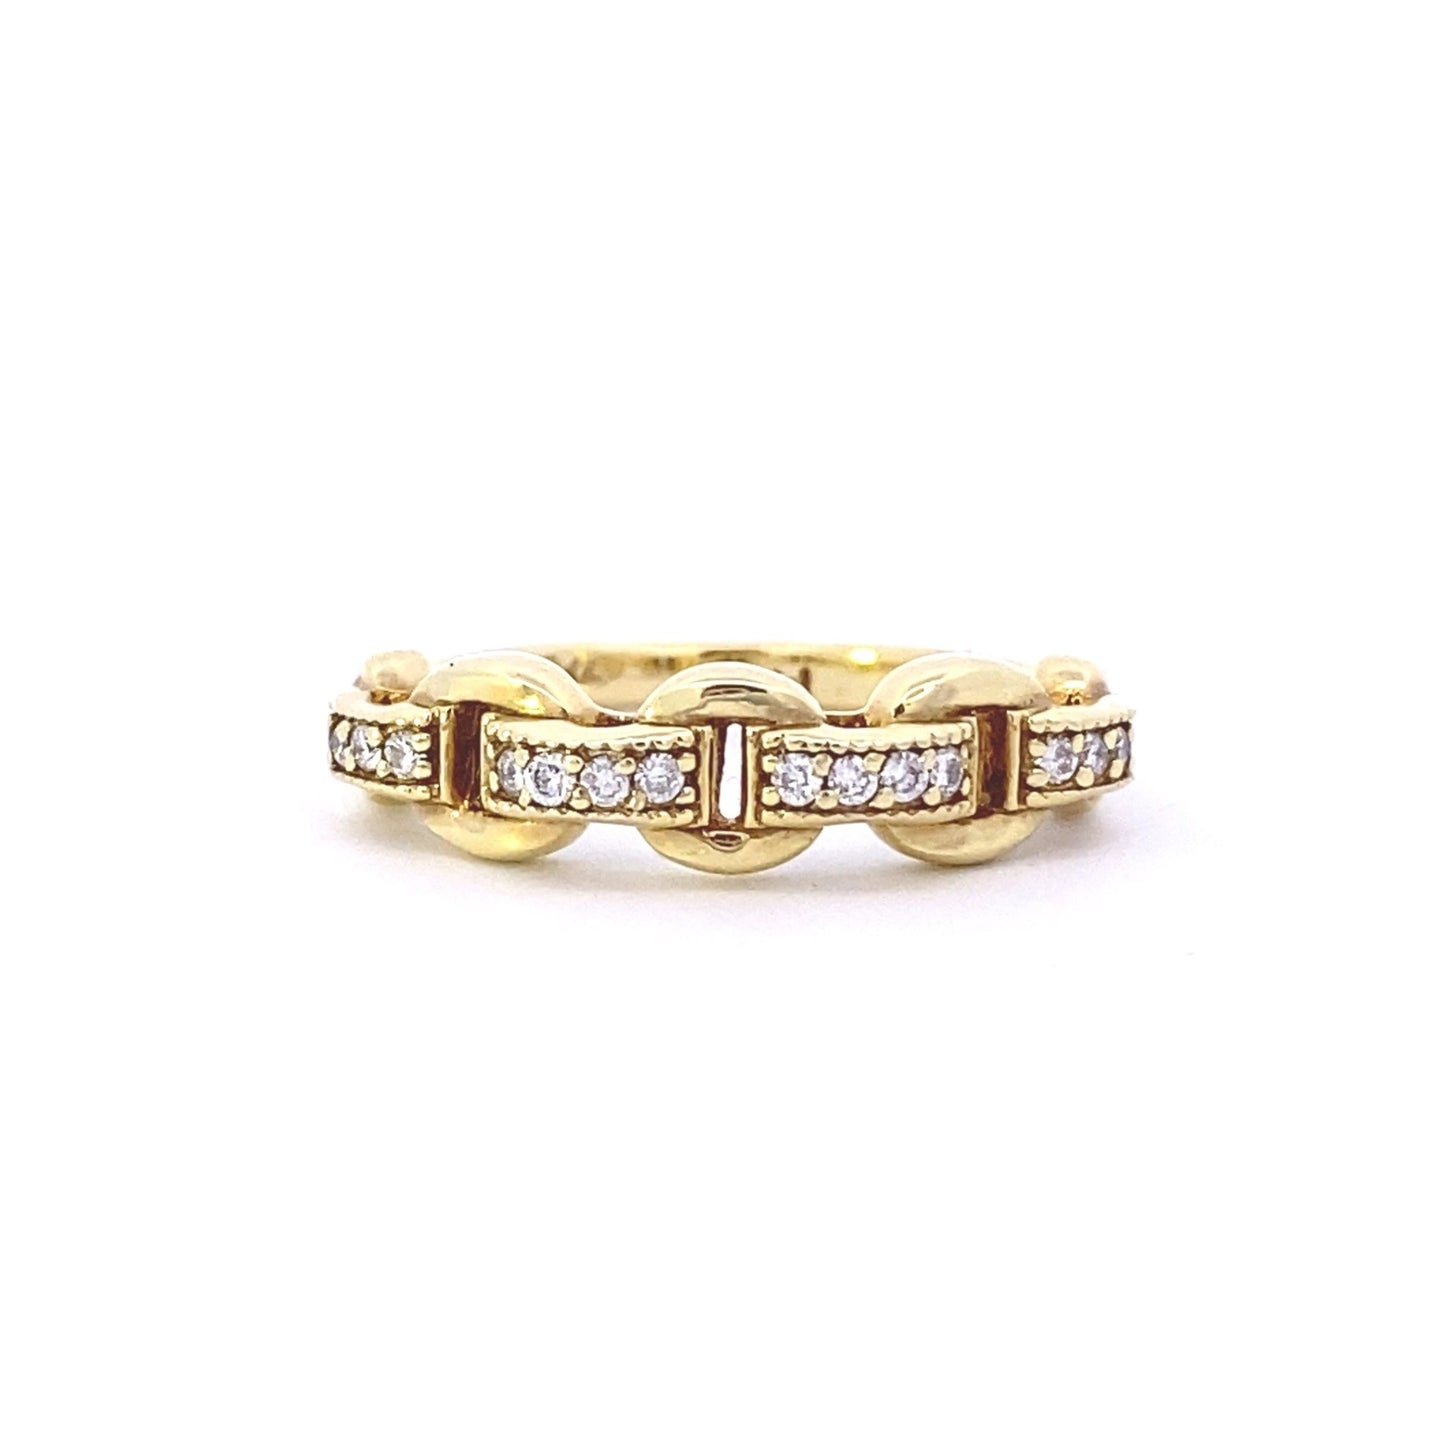 Chain-link yellow gold band with diamonds - Gaines Jewelers